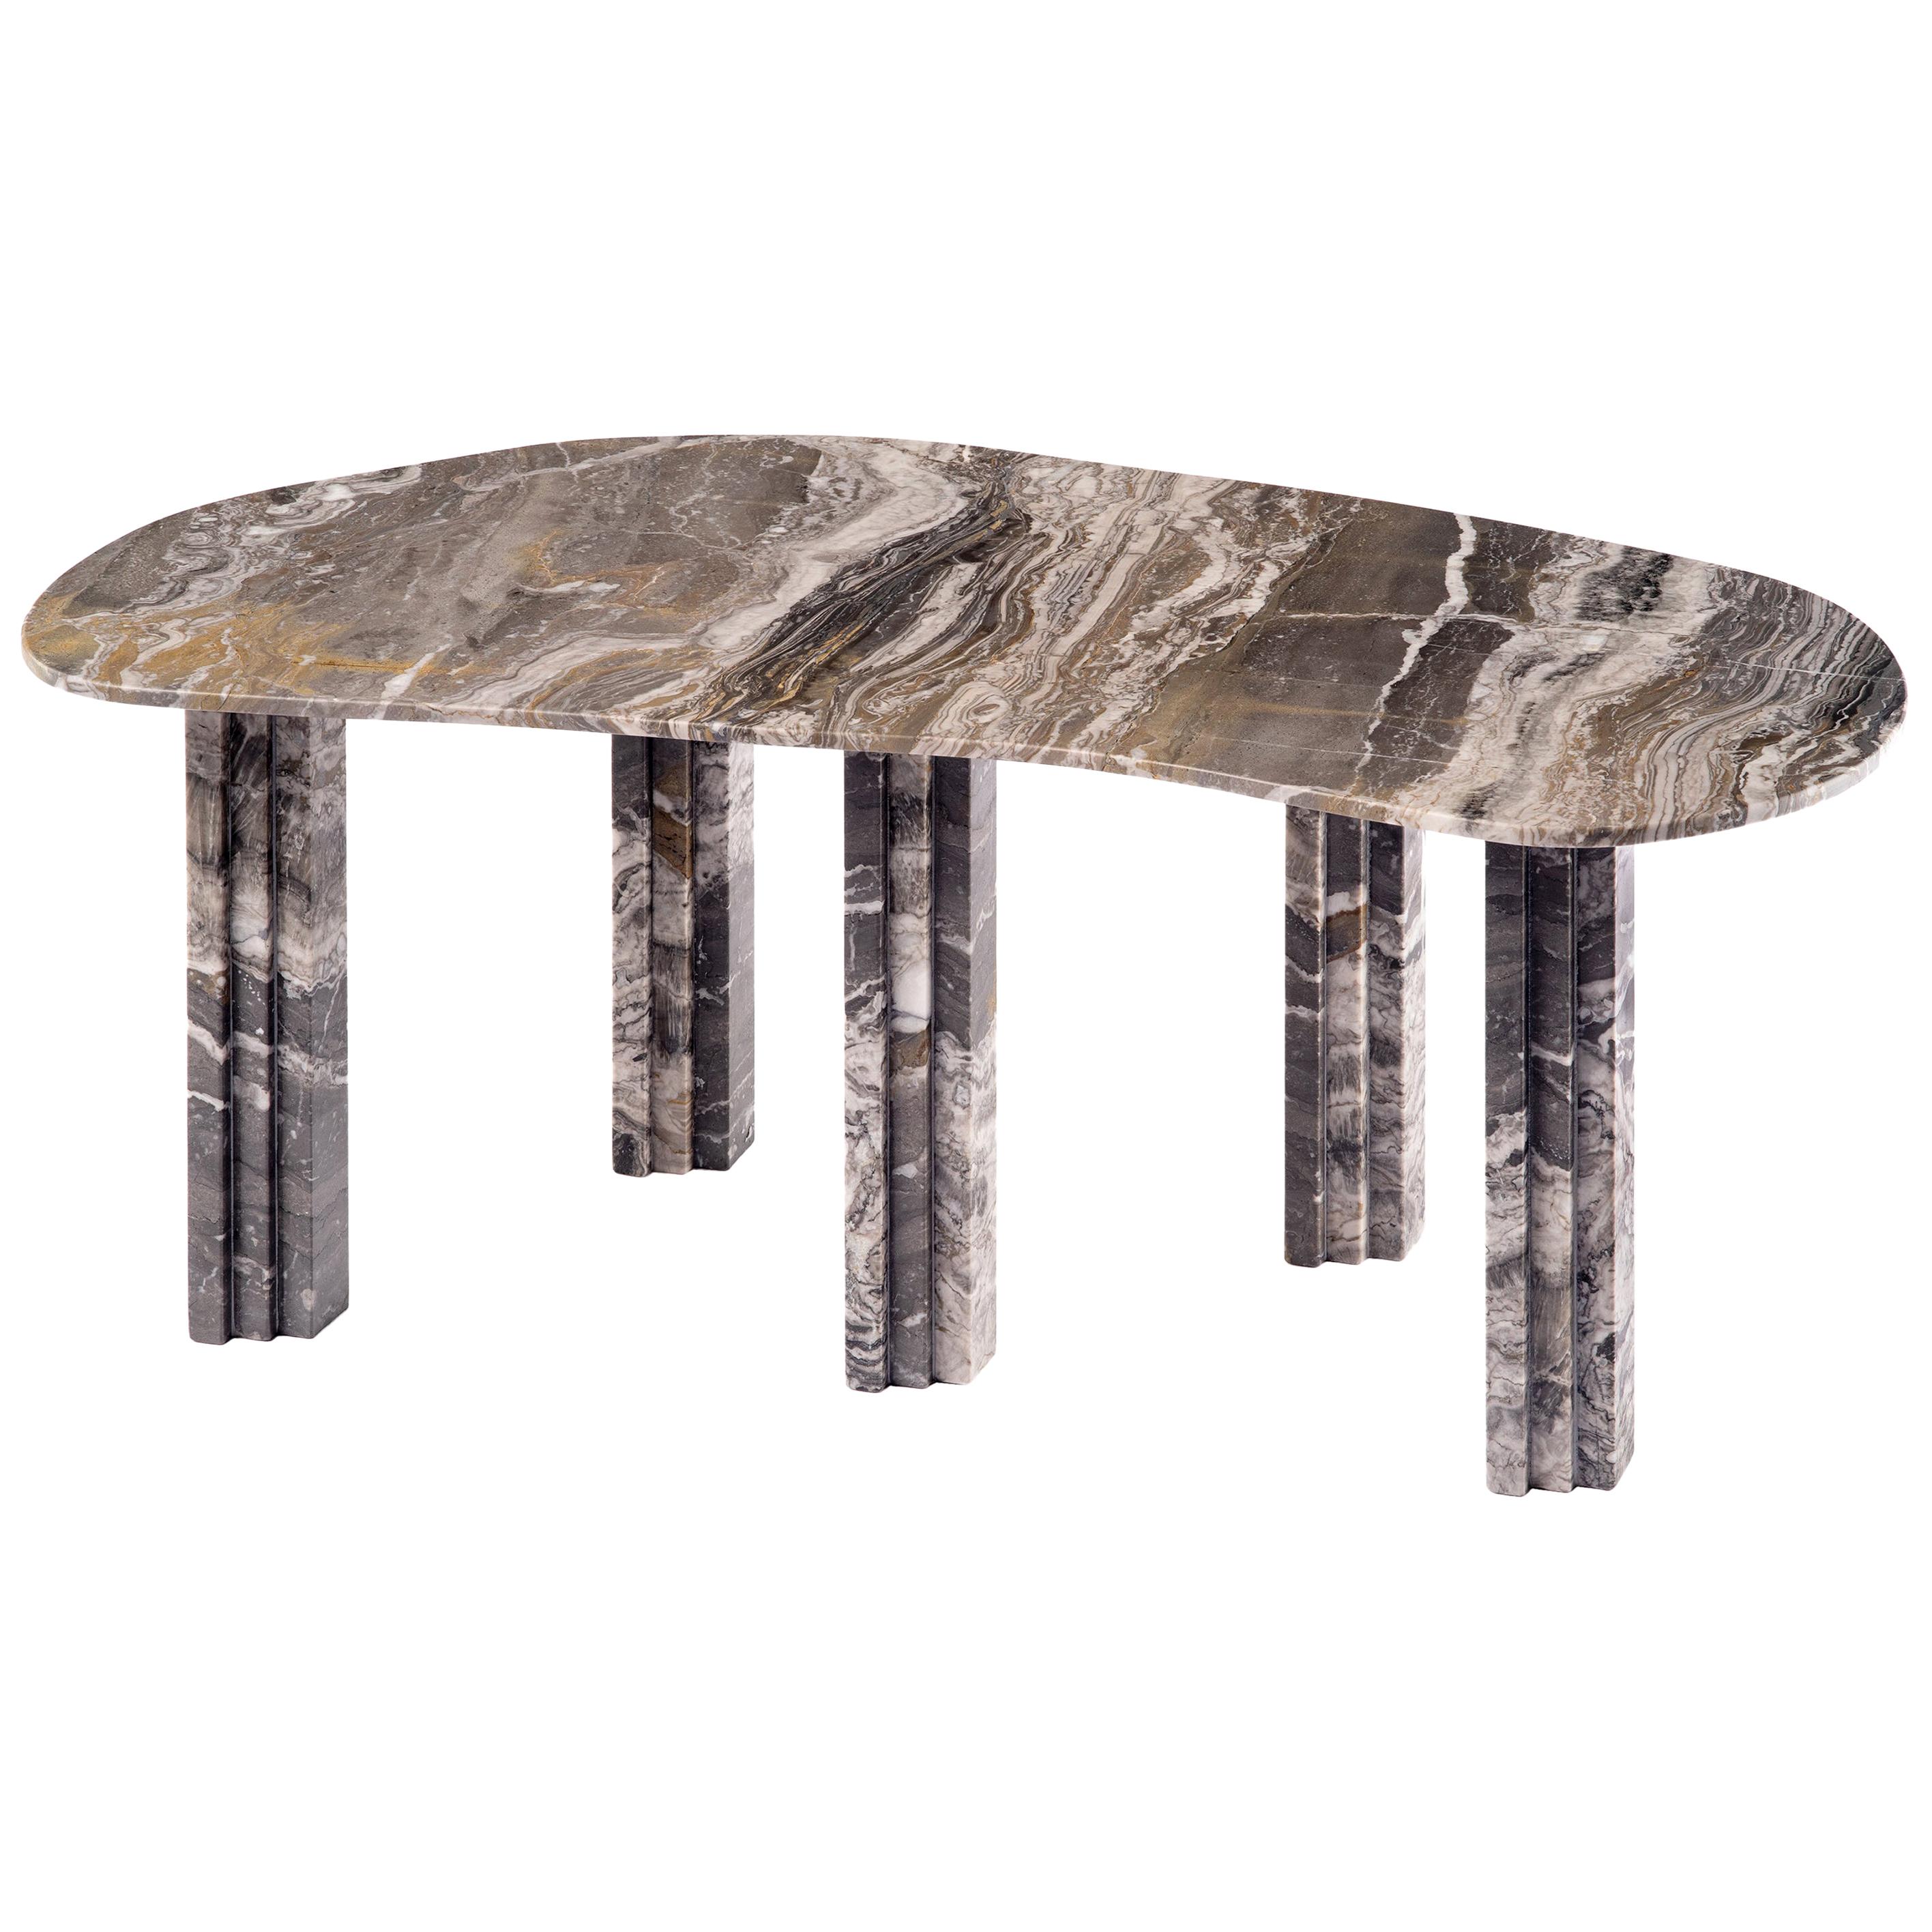 Sculptural marble coffee table, Lorenzo Bini
Title: Bièvre
Measures: 90 x 50 x H 37 cm
Materials: Arabescato Orobico


SIX TABLEAUX is a series of marble tables designed by Lorenzo Bini and built by ATZARA MARMI with the support of